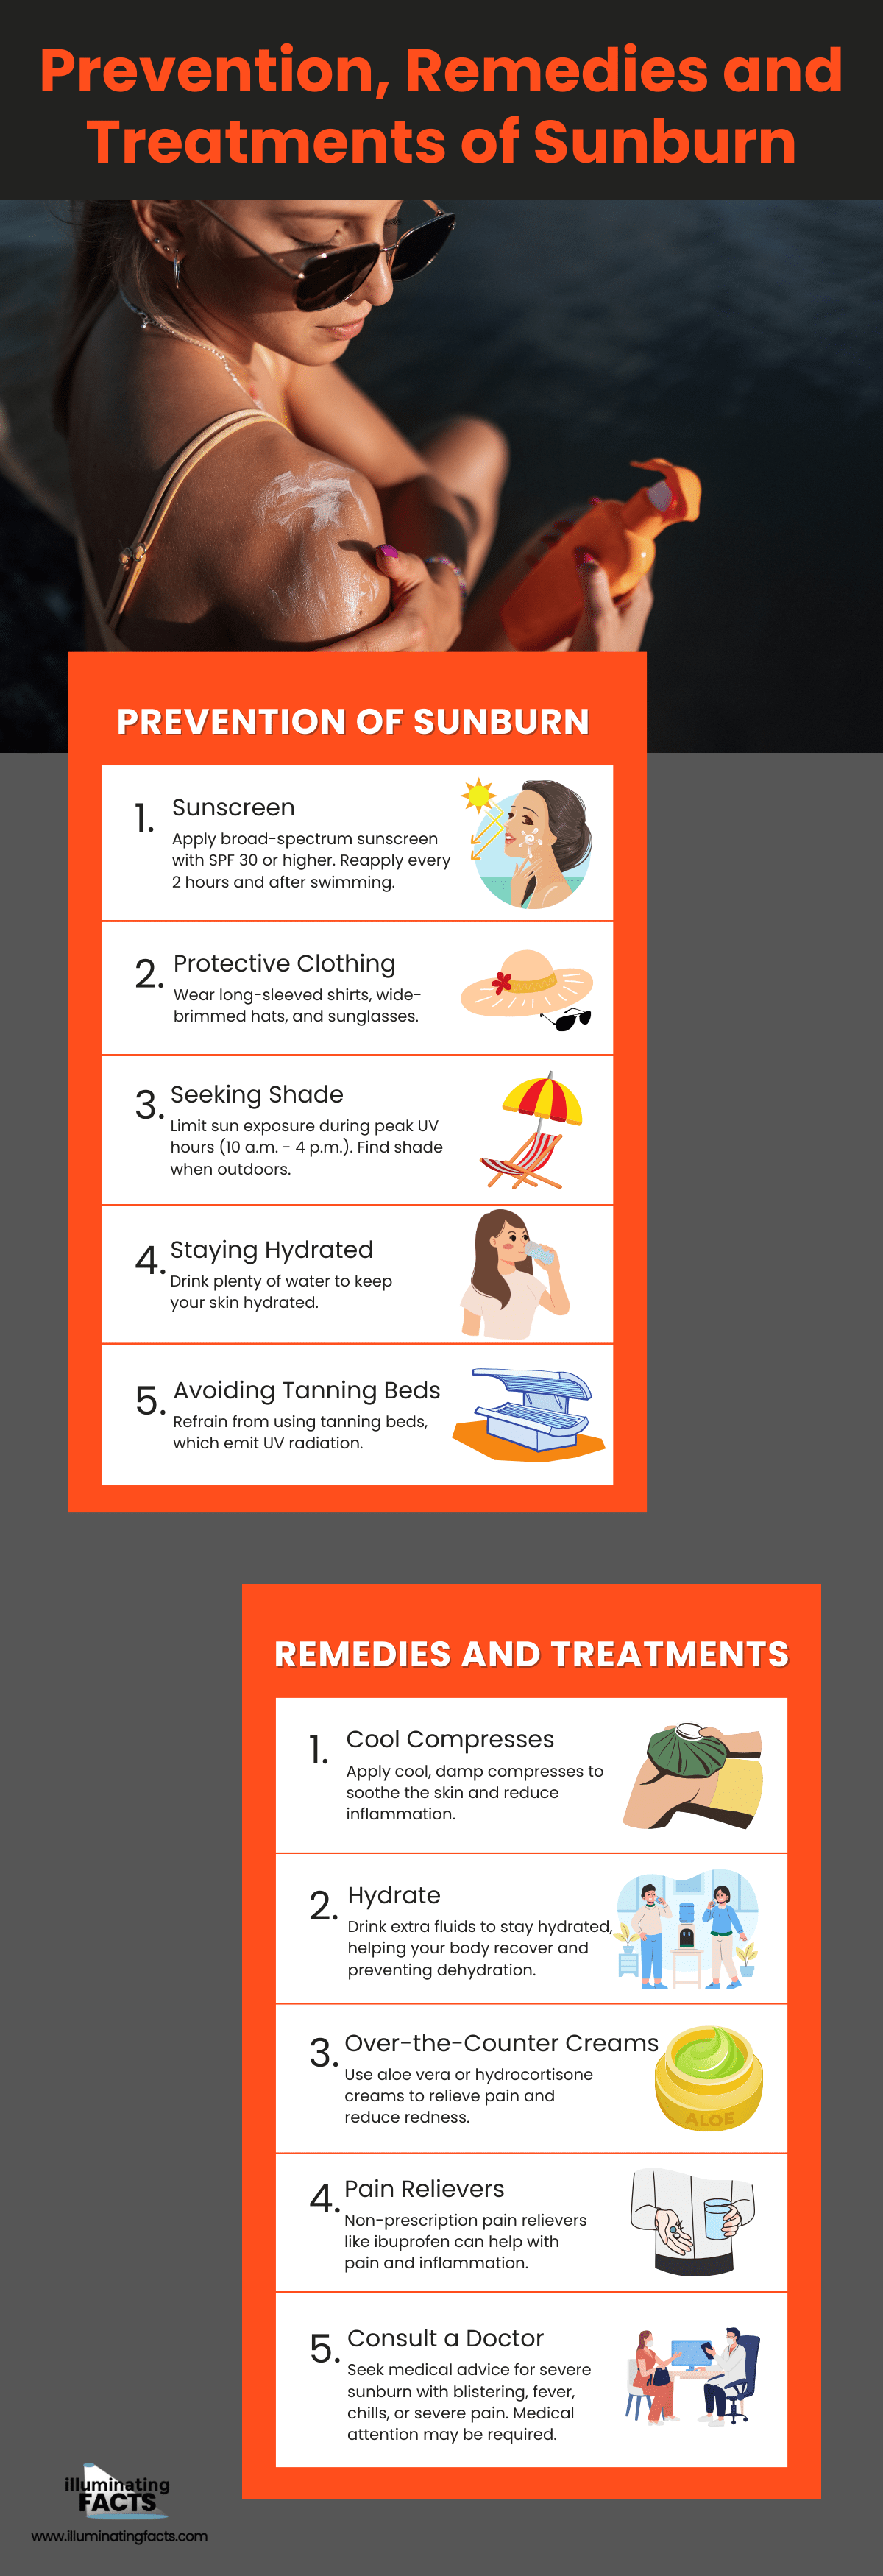 Prevention, Remedies and Treatments of Sunburn